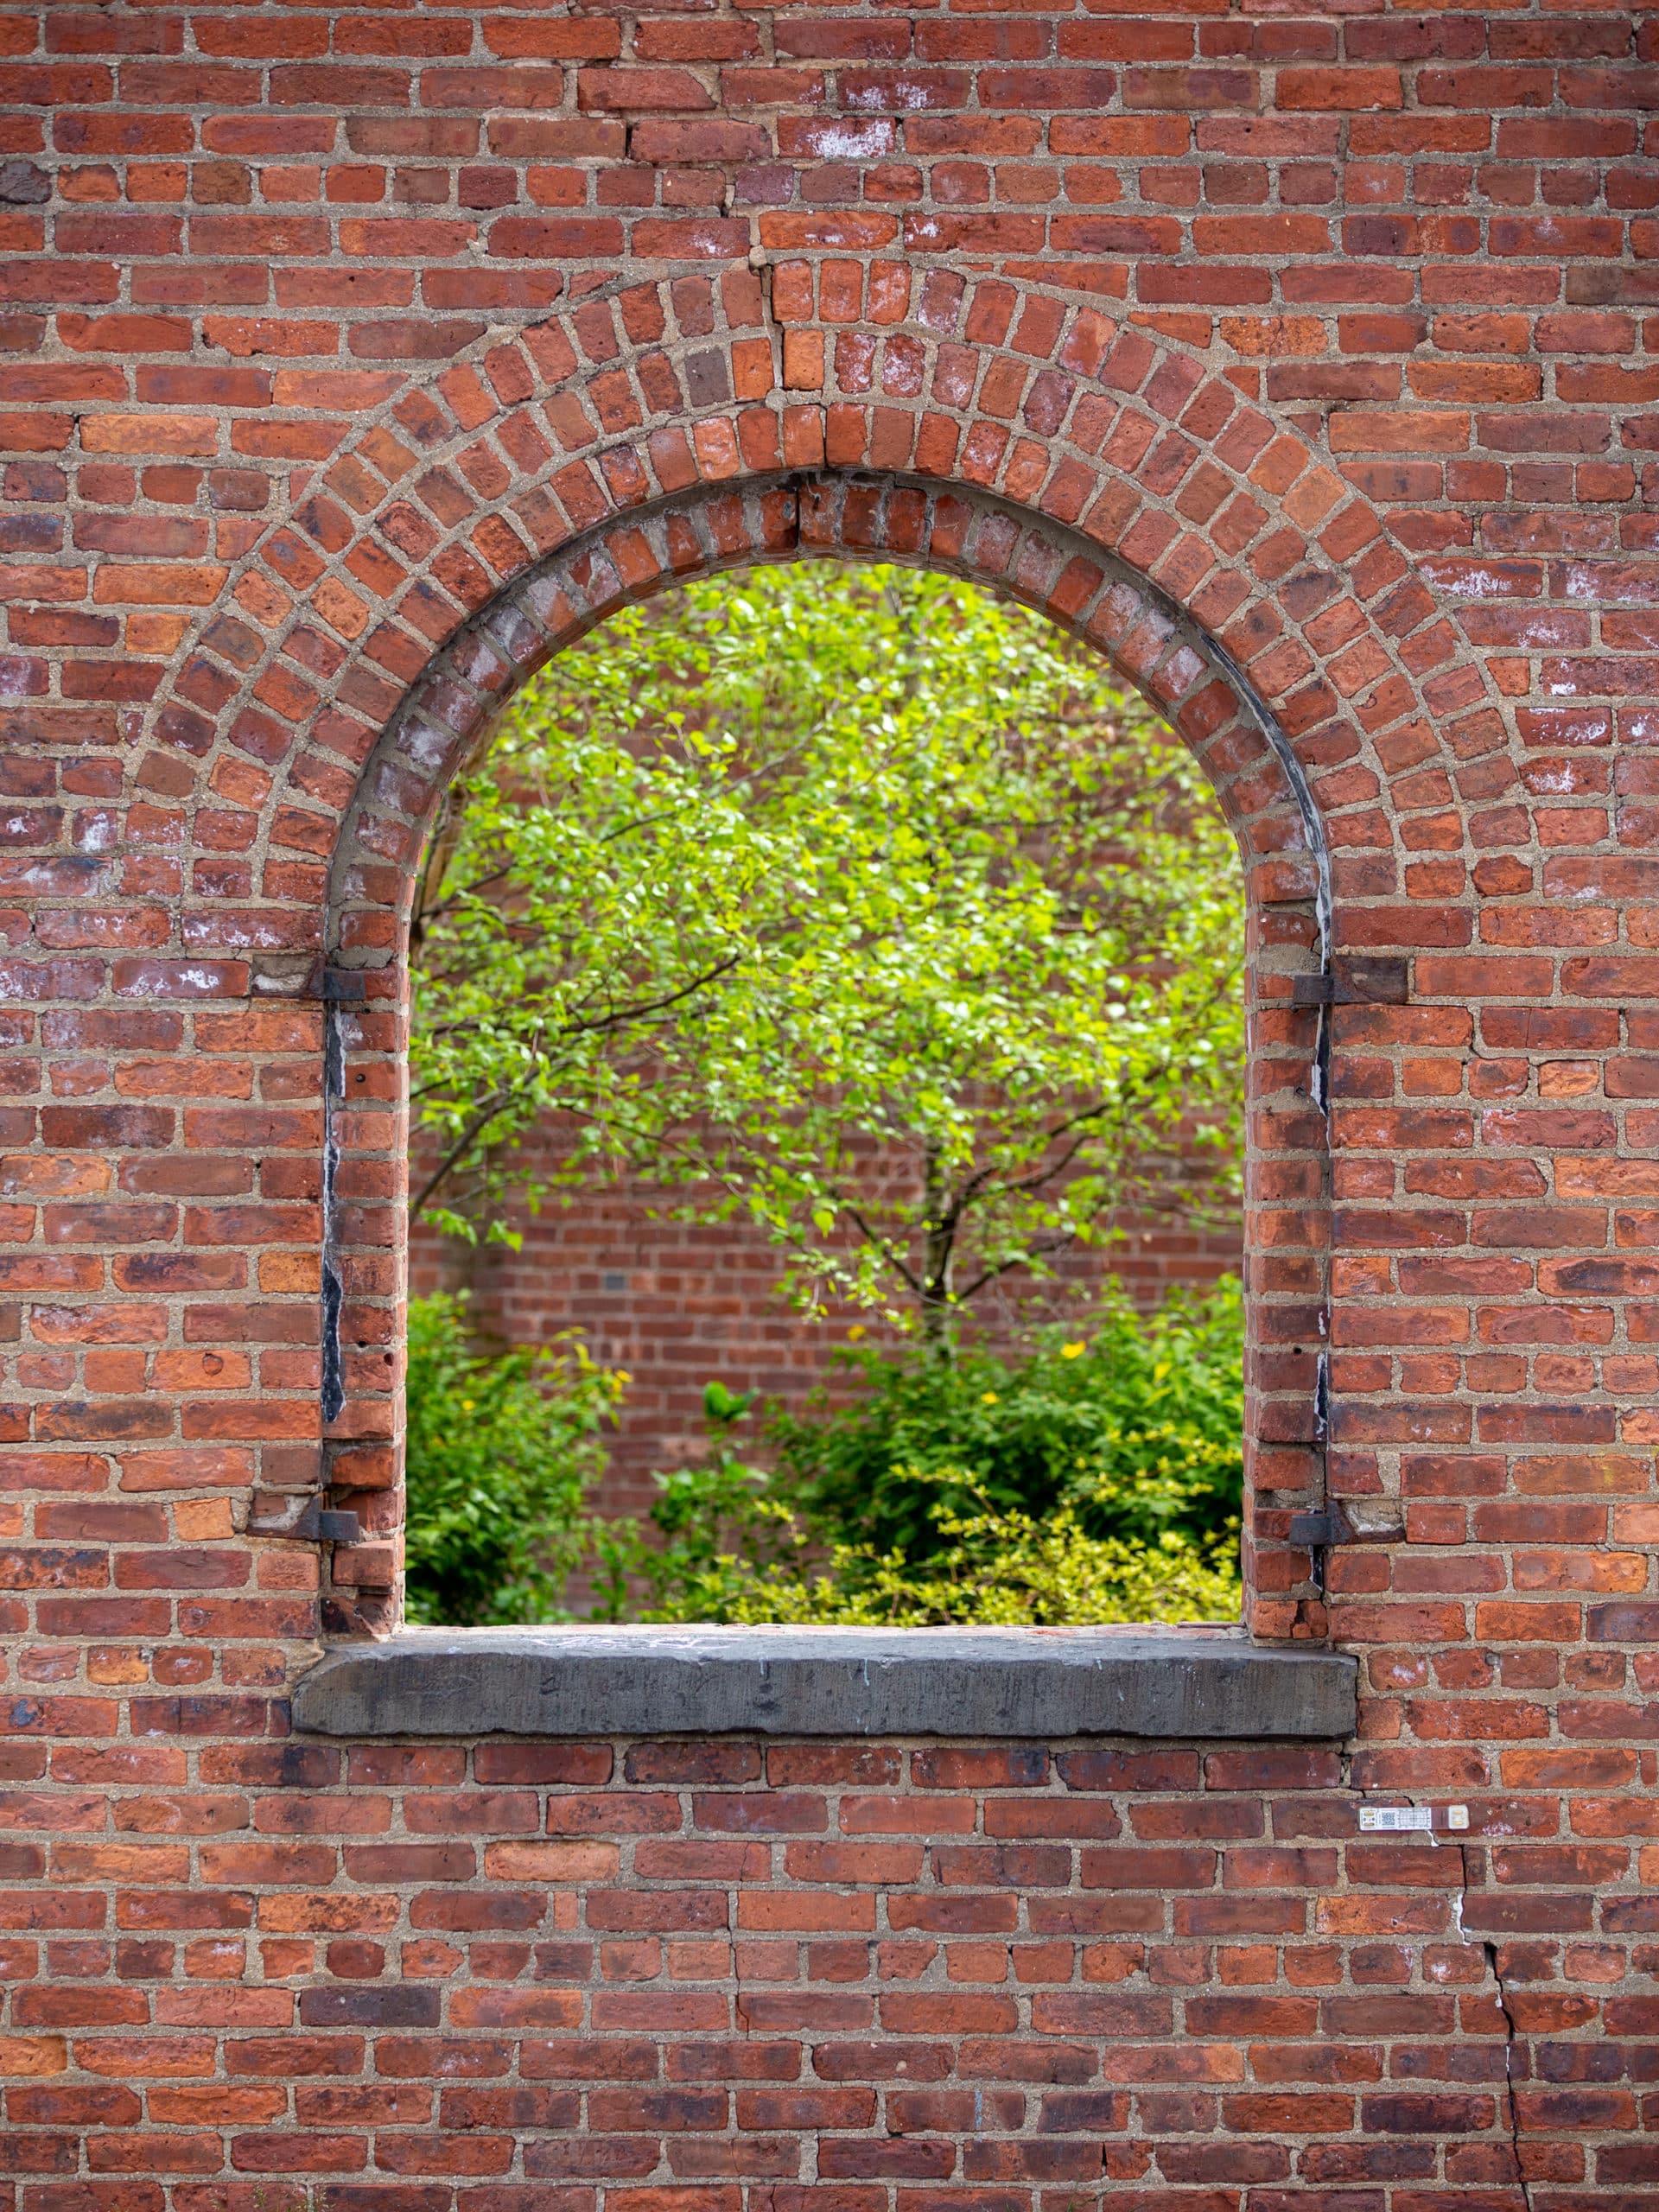 Brick arched window looking in at trees in the Max Family Garden.